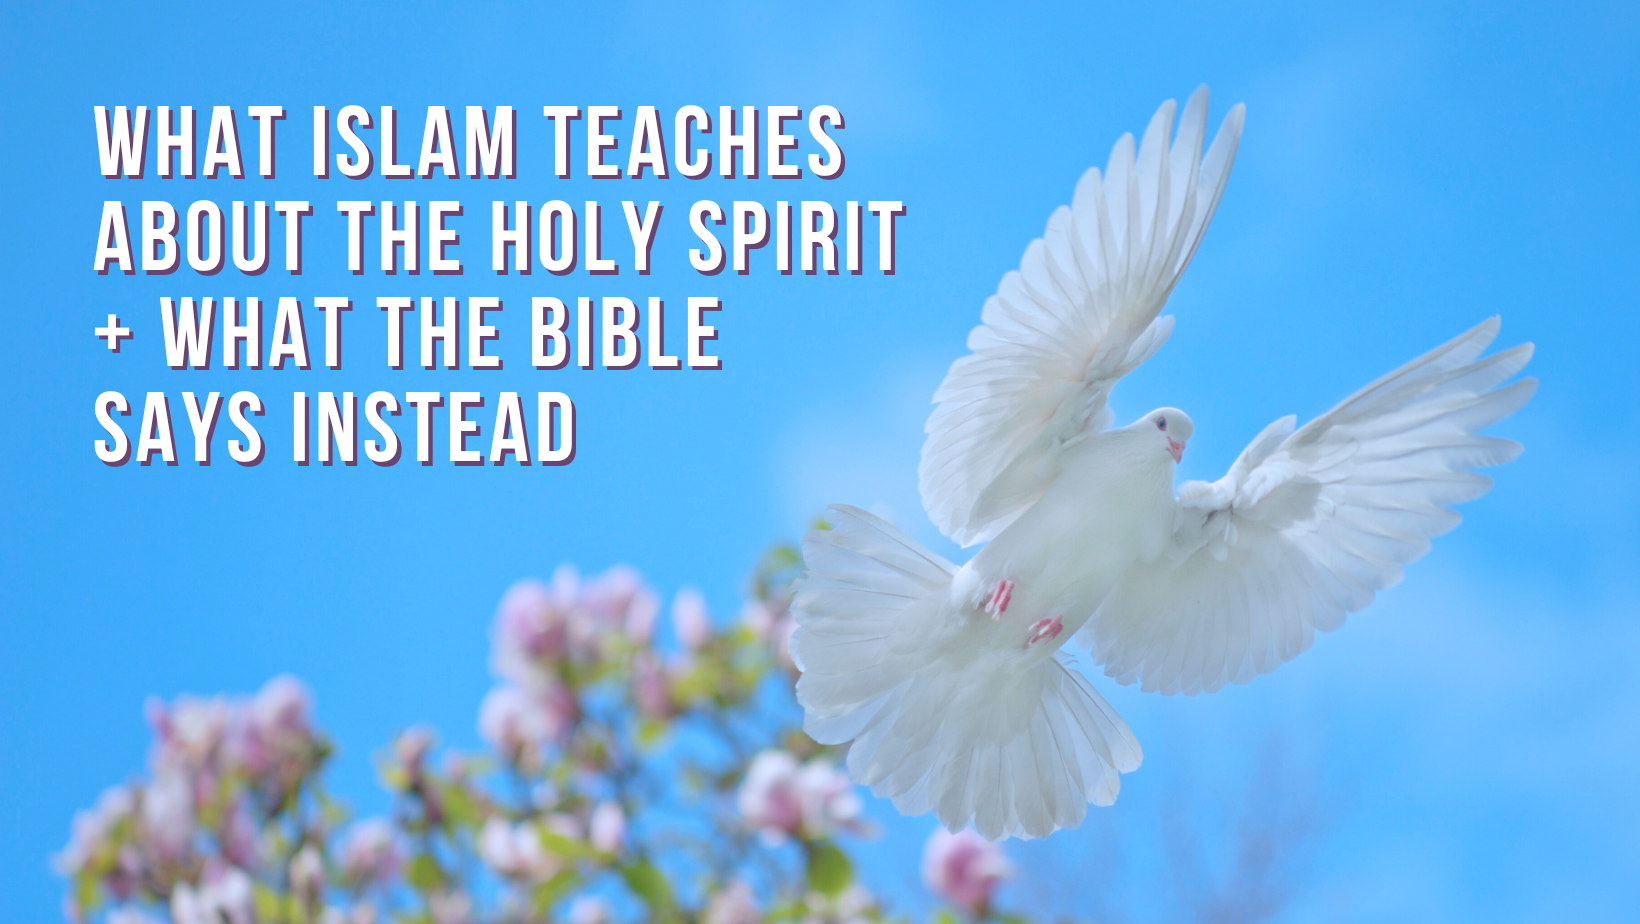 What Islam teaches about the Holy Spirit + What the Bible says instead